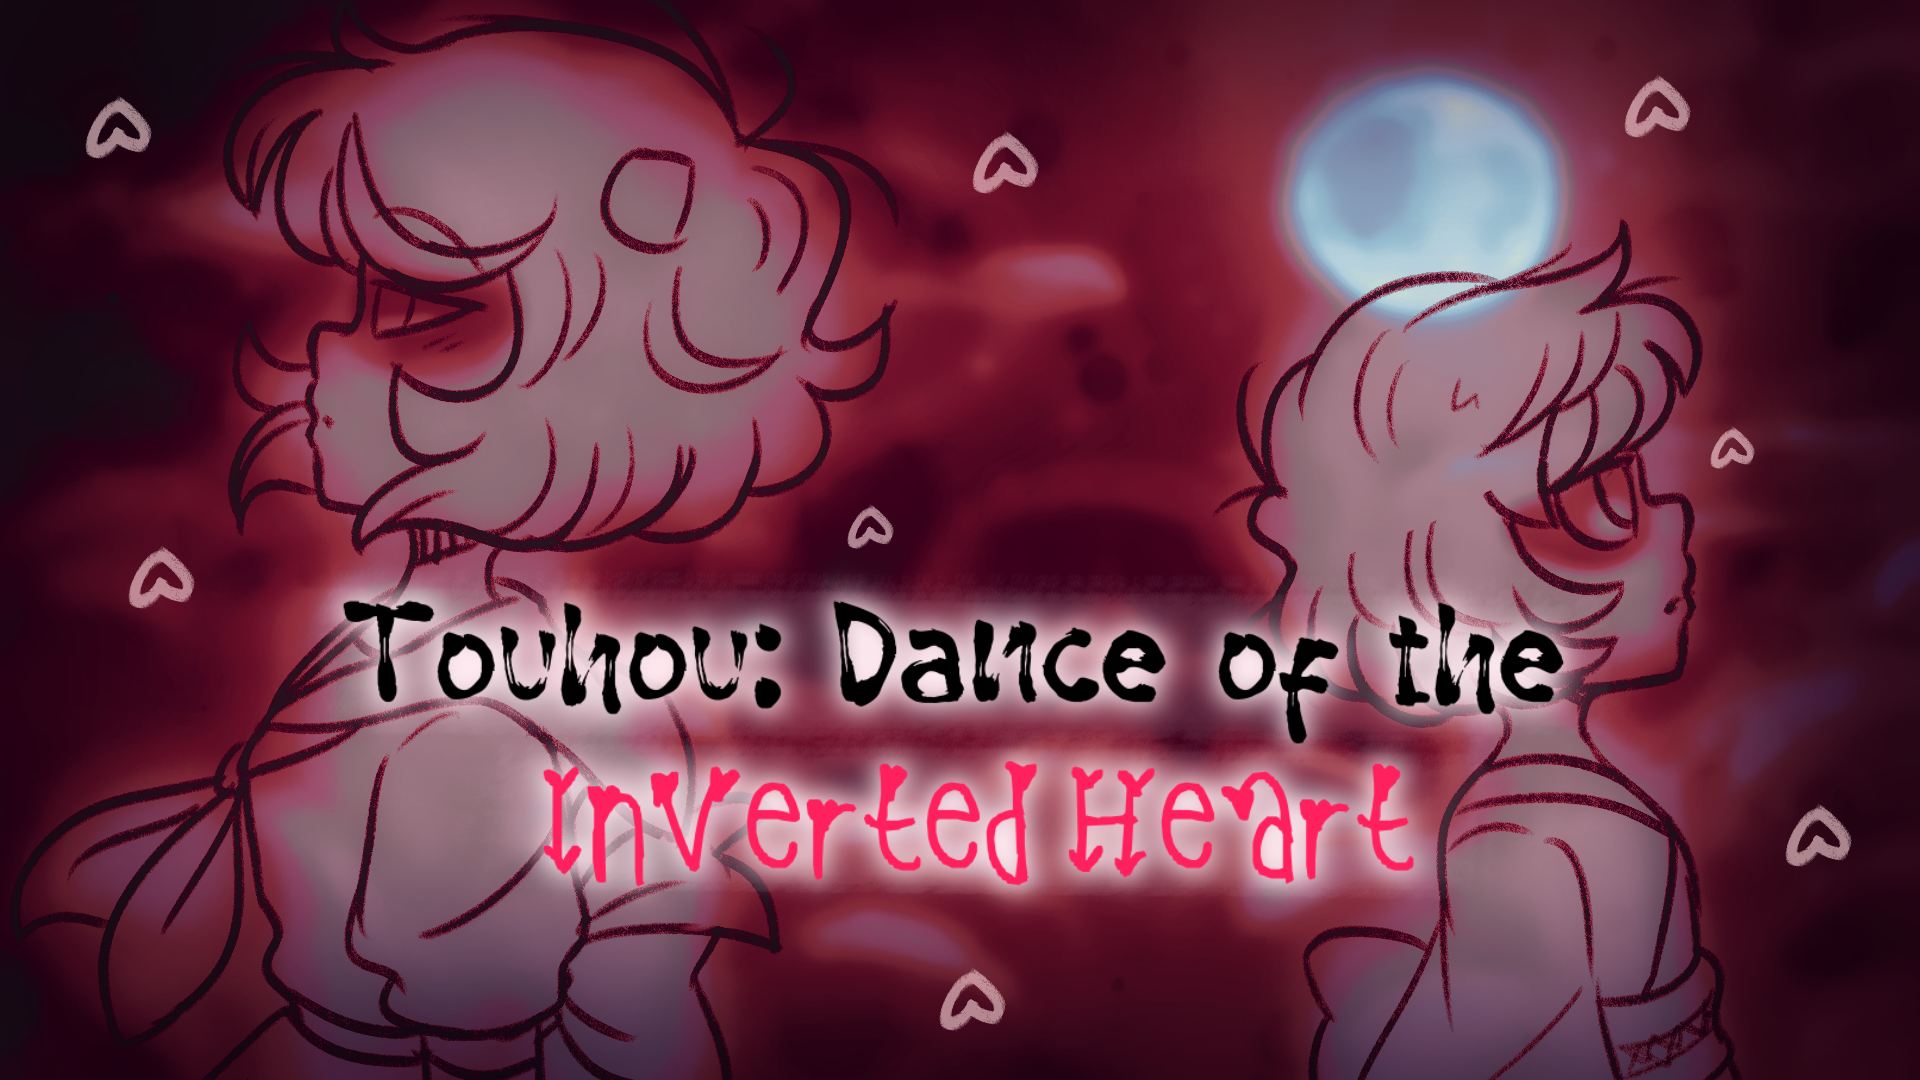 Touhou: Dance of the Inverted Heart